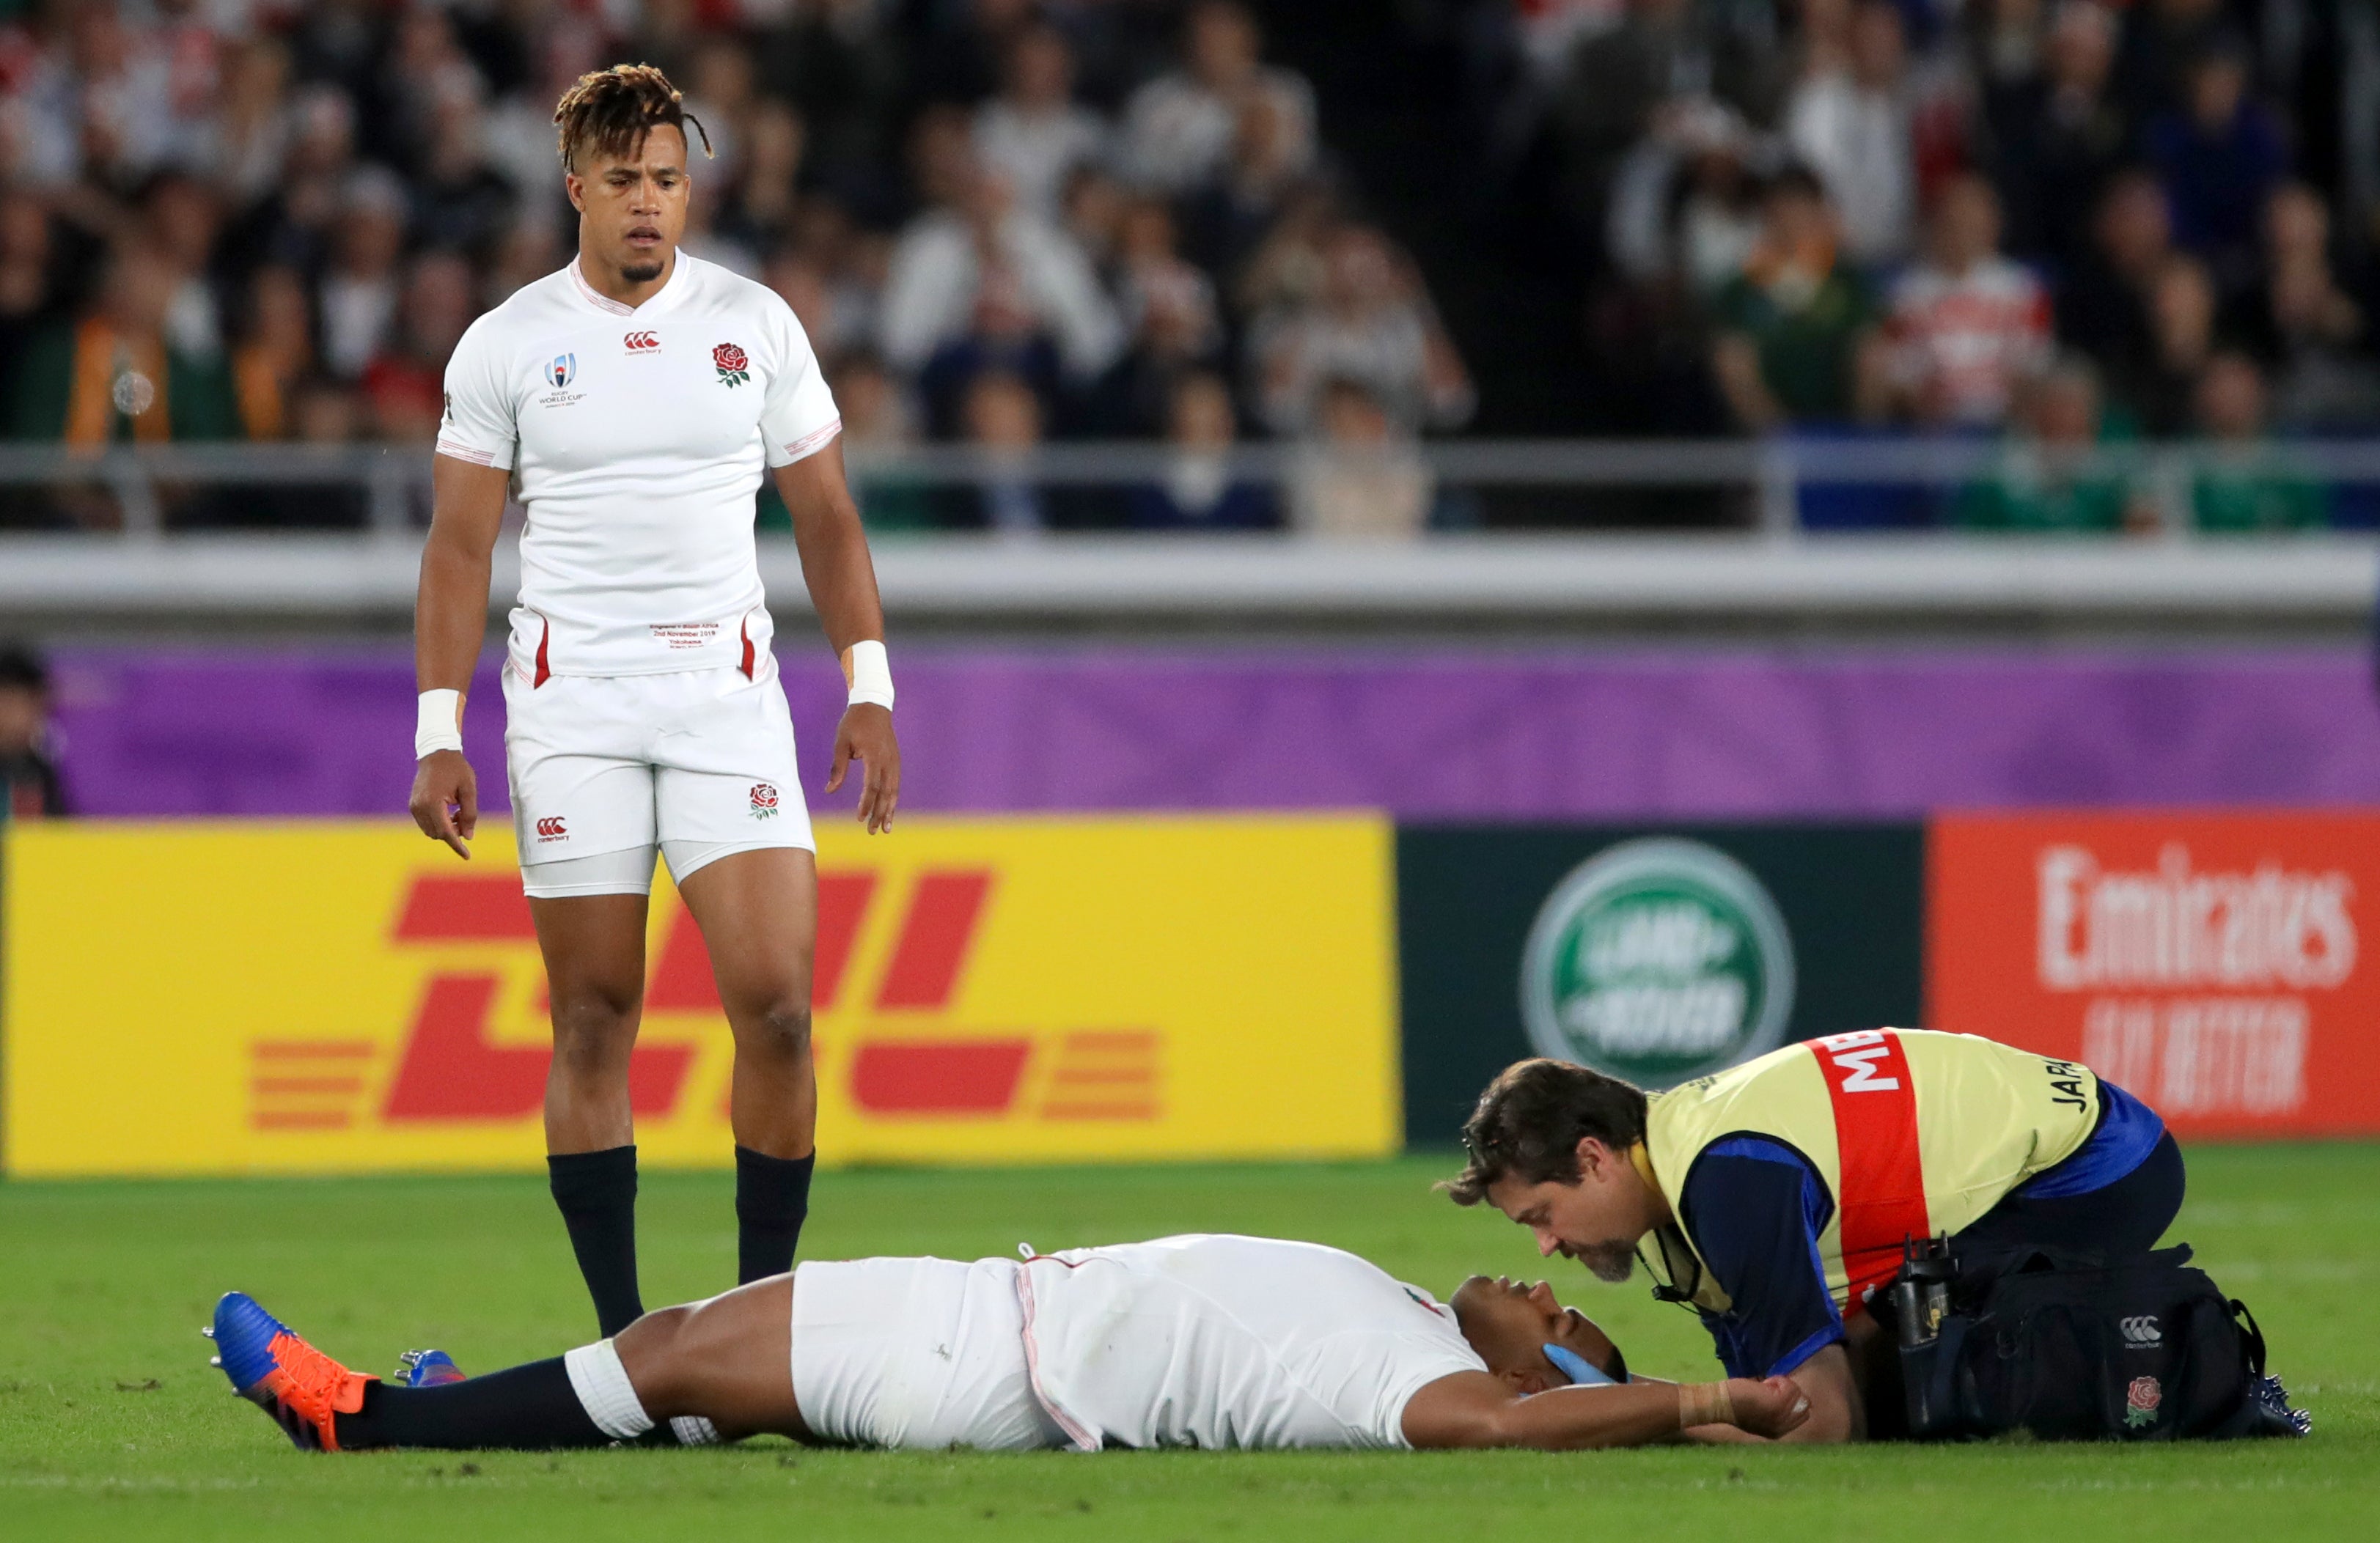 Kyle Sinckler was knocked out against South Africa in the 2019 World Cup final (Adam Davy/PA)